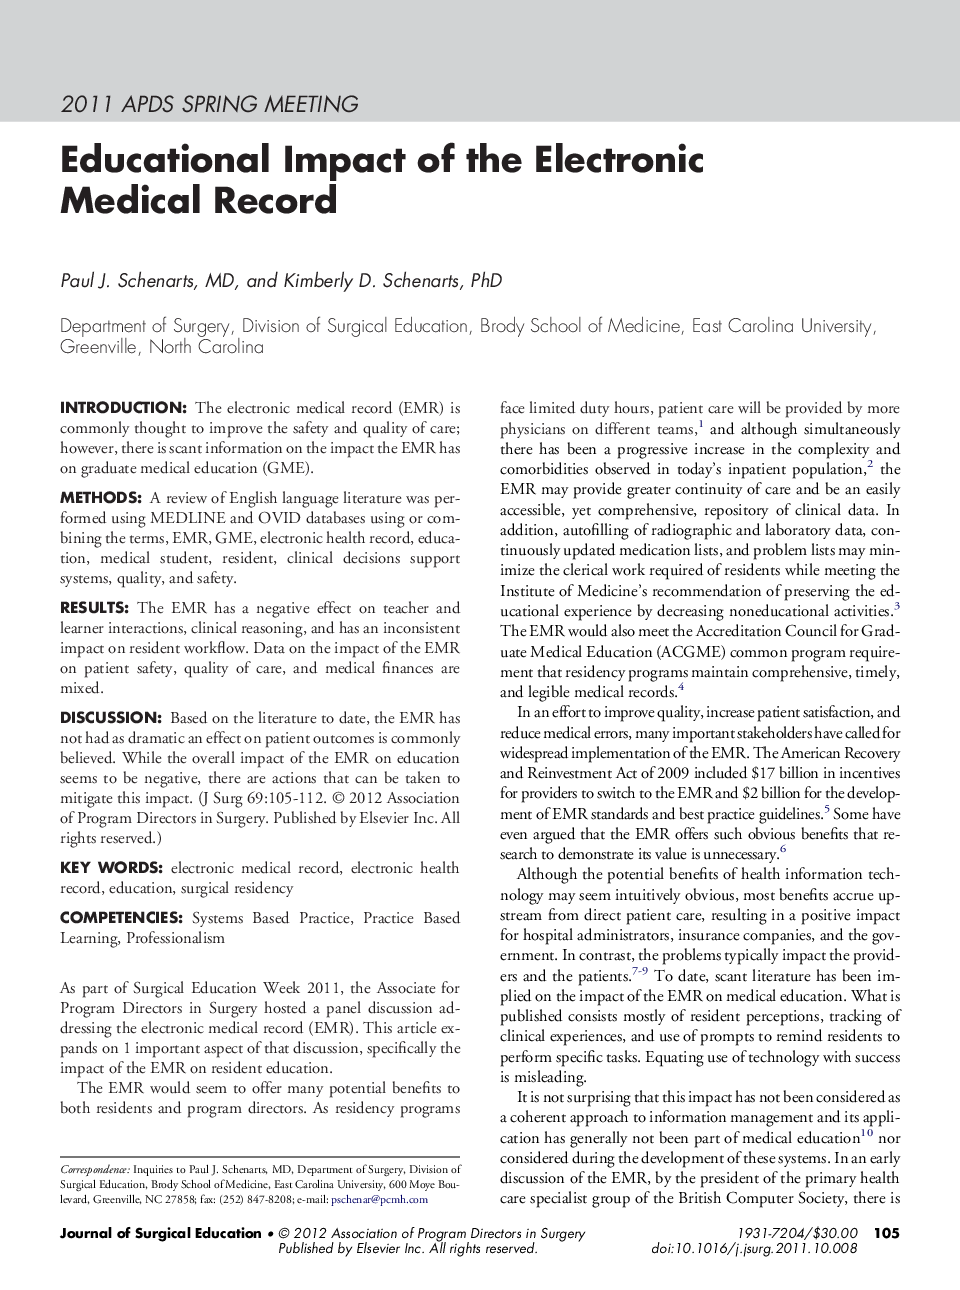 Educational Impact of the Electronic Medical Record